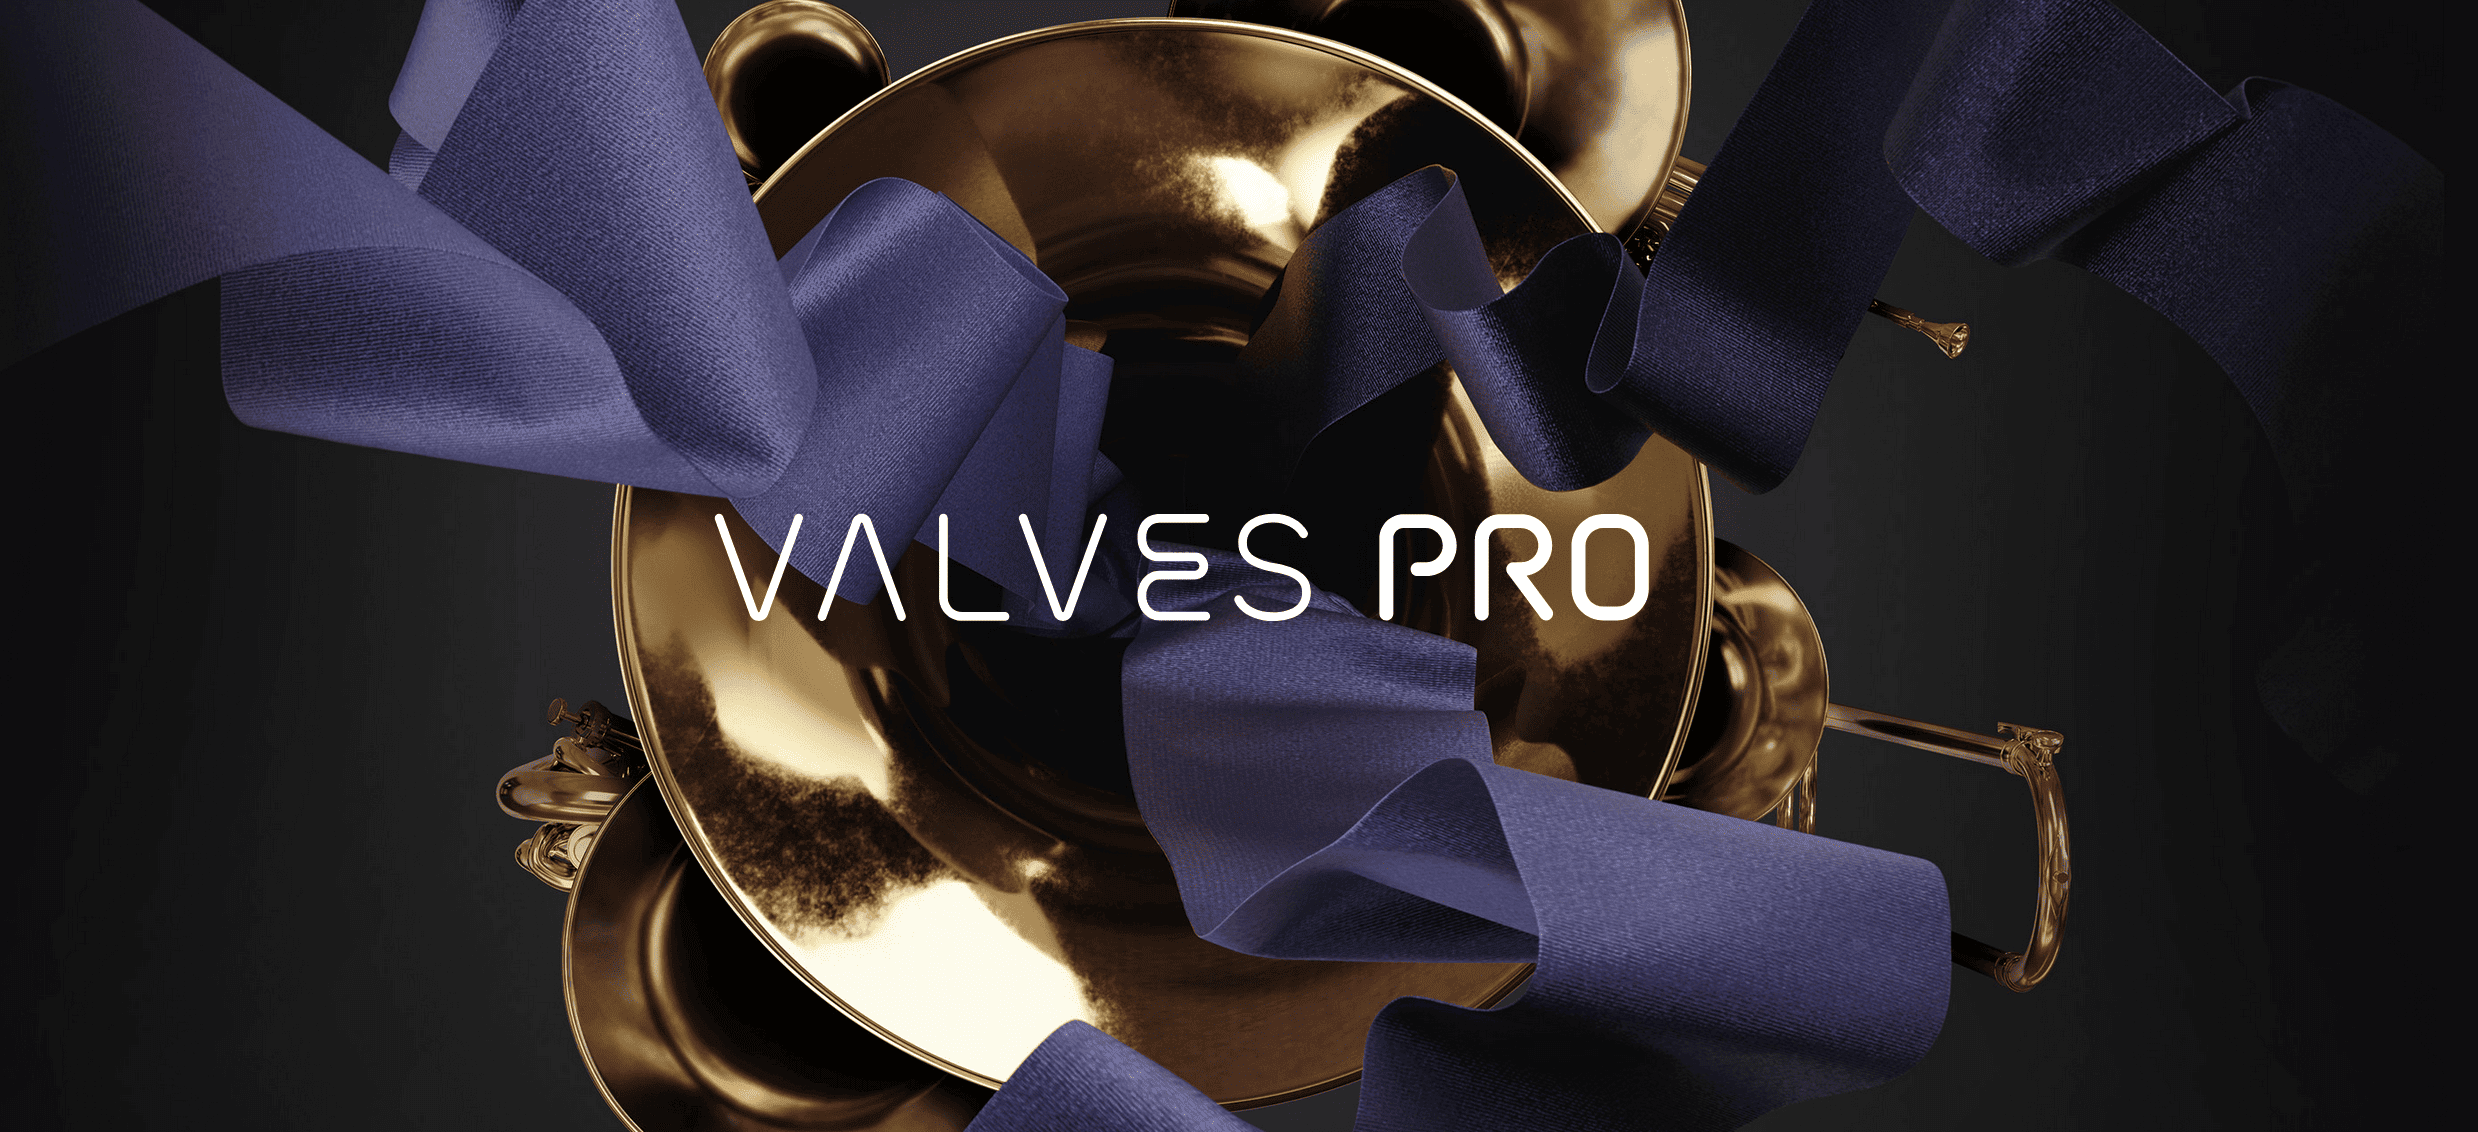 Native Instruments reveals incredible horns and brass samples in Valves Pro